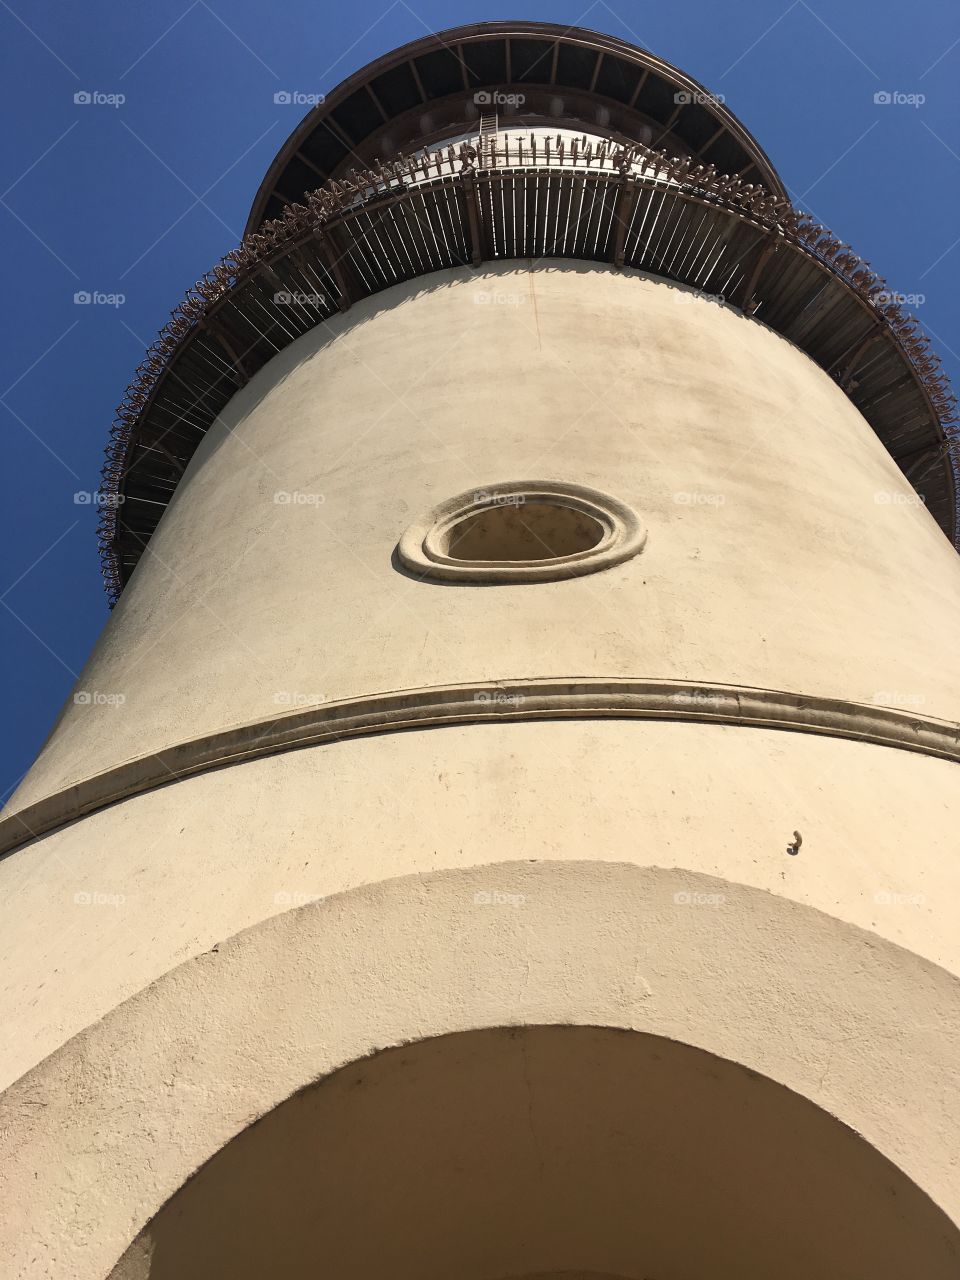 Fresno water tower